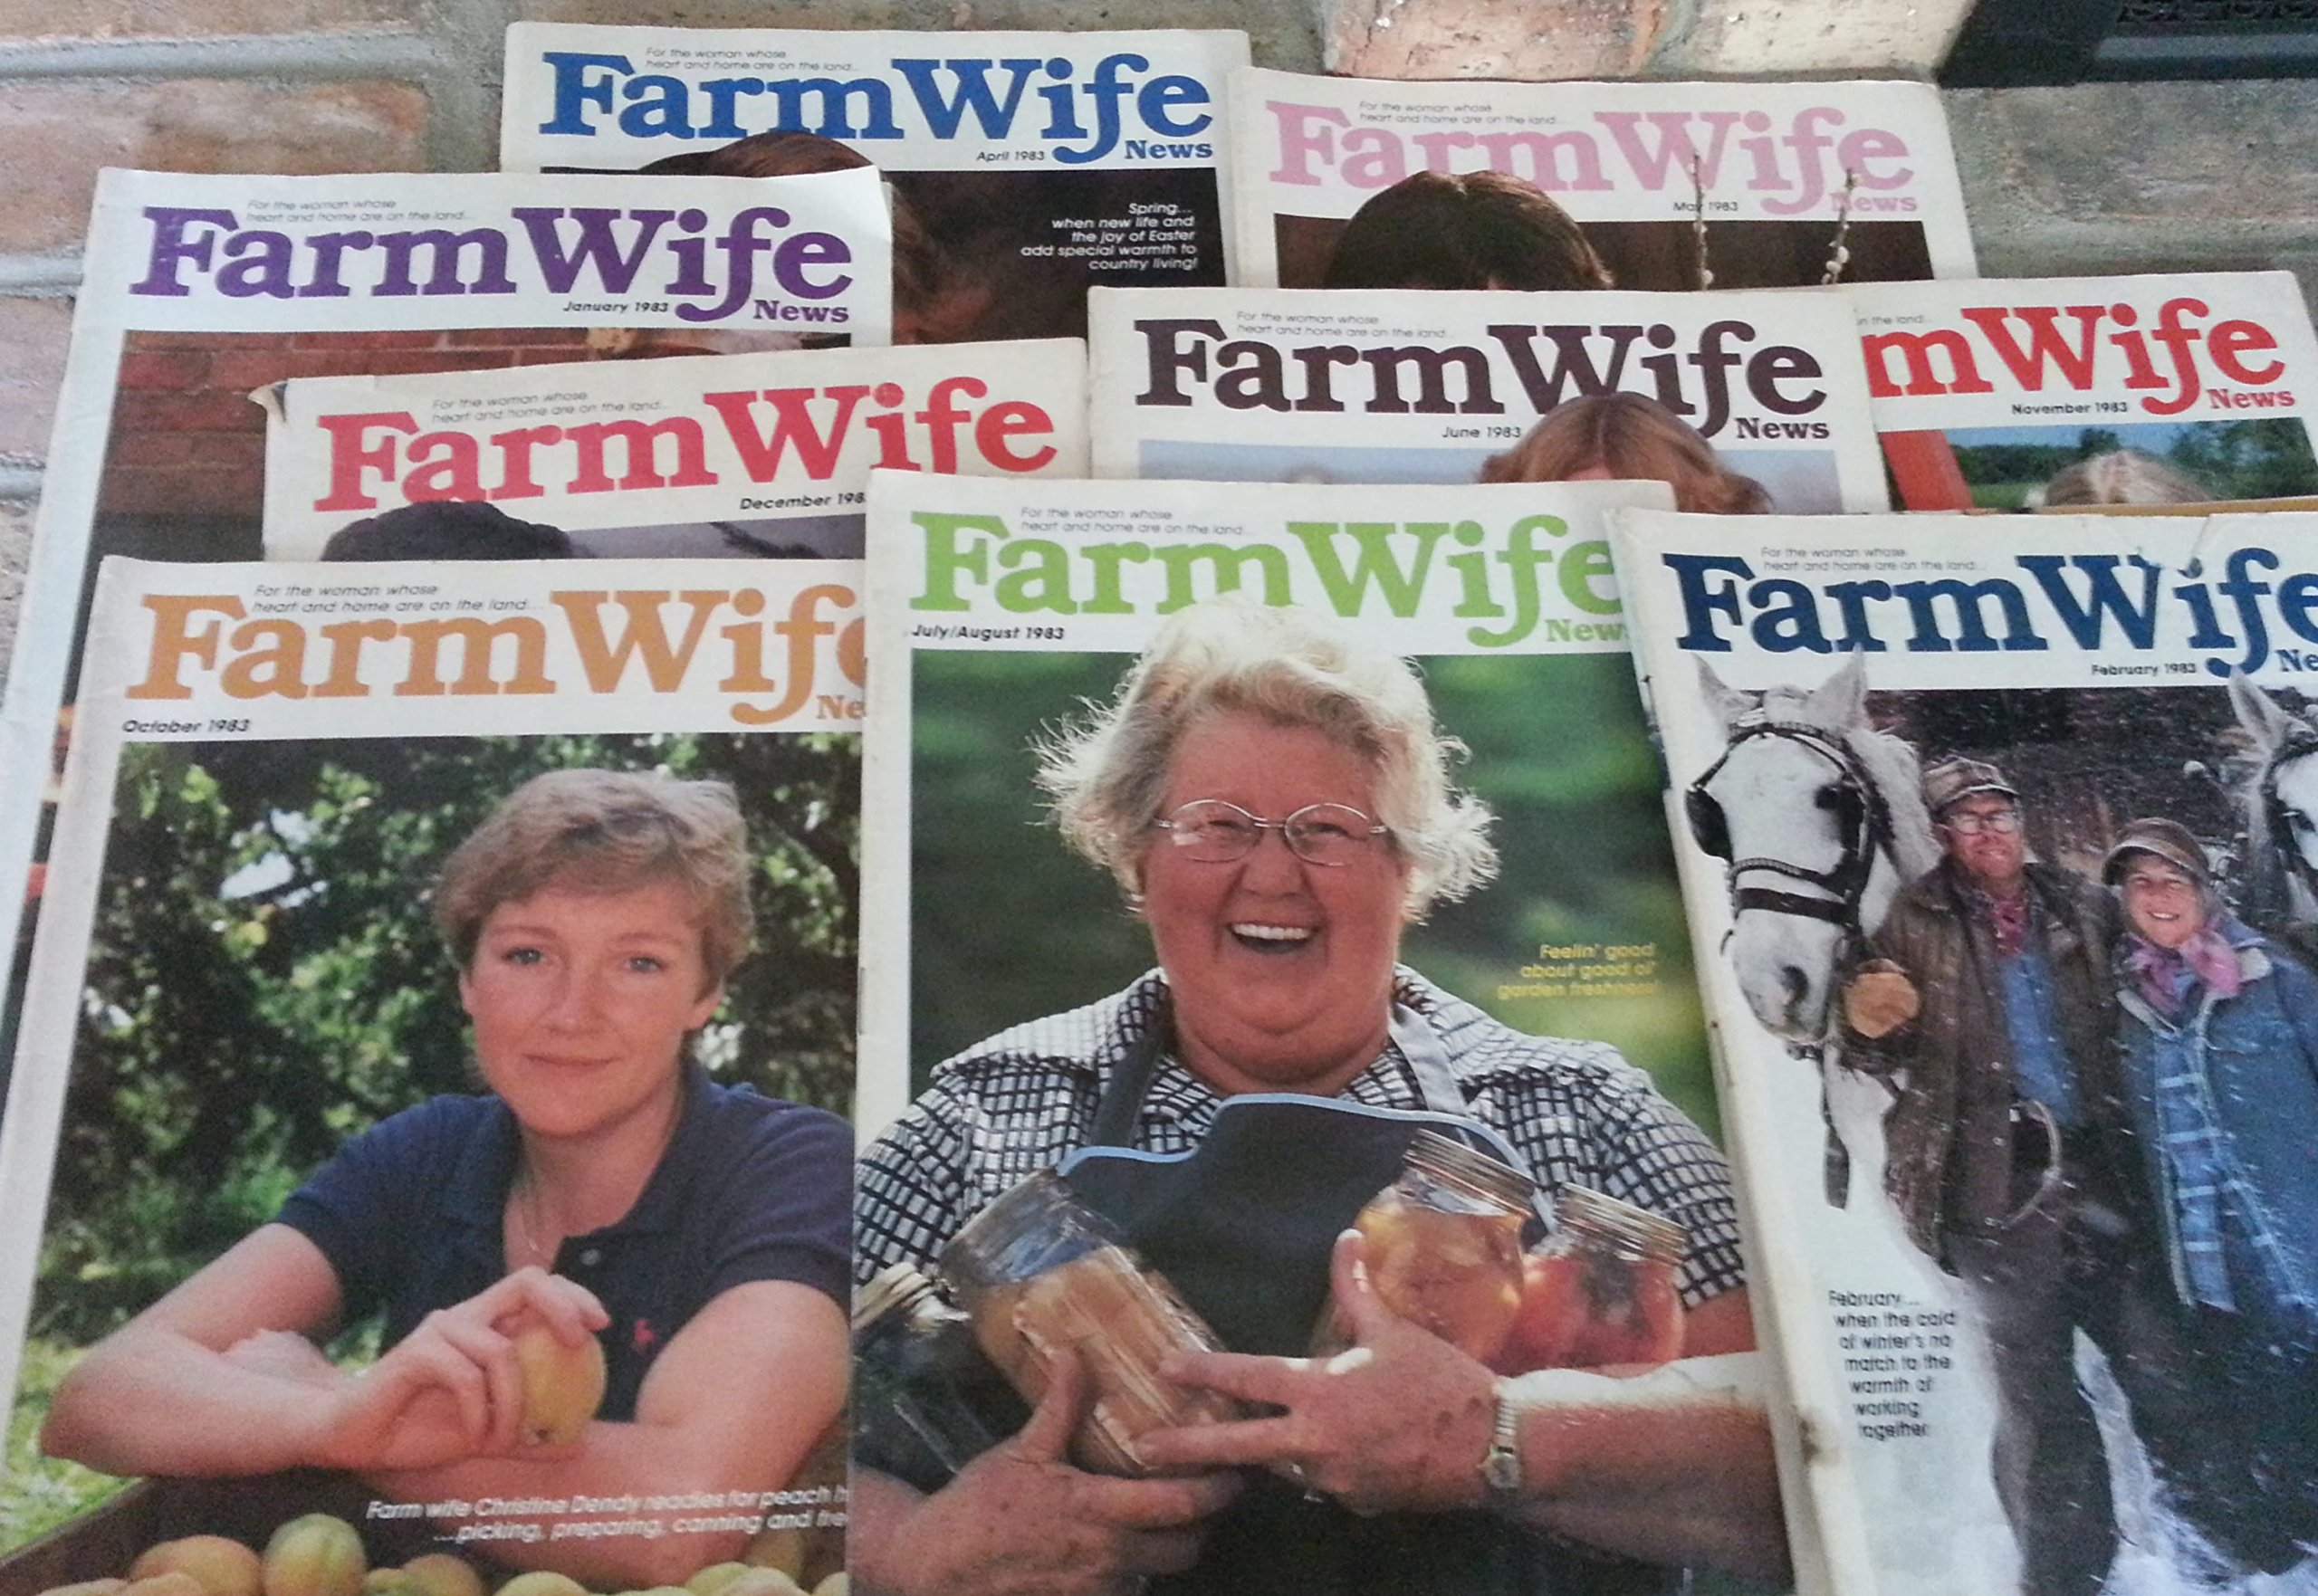 Farm Wife News Magazines - 8 Issues of the Year 1983 - January, April, May, June, July/August, October, November and December.